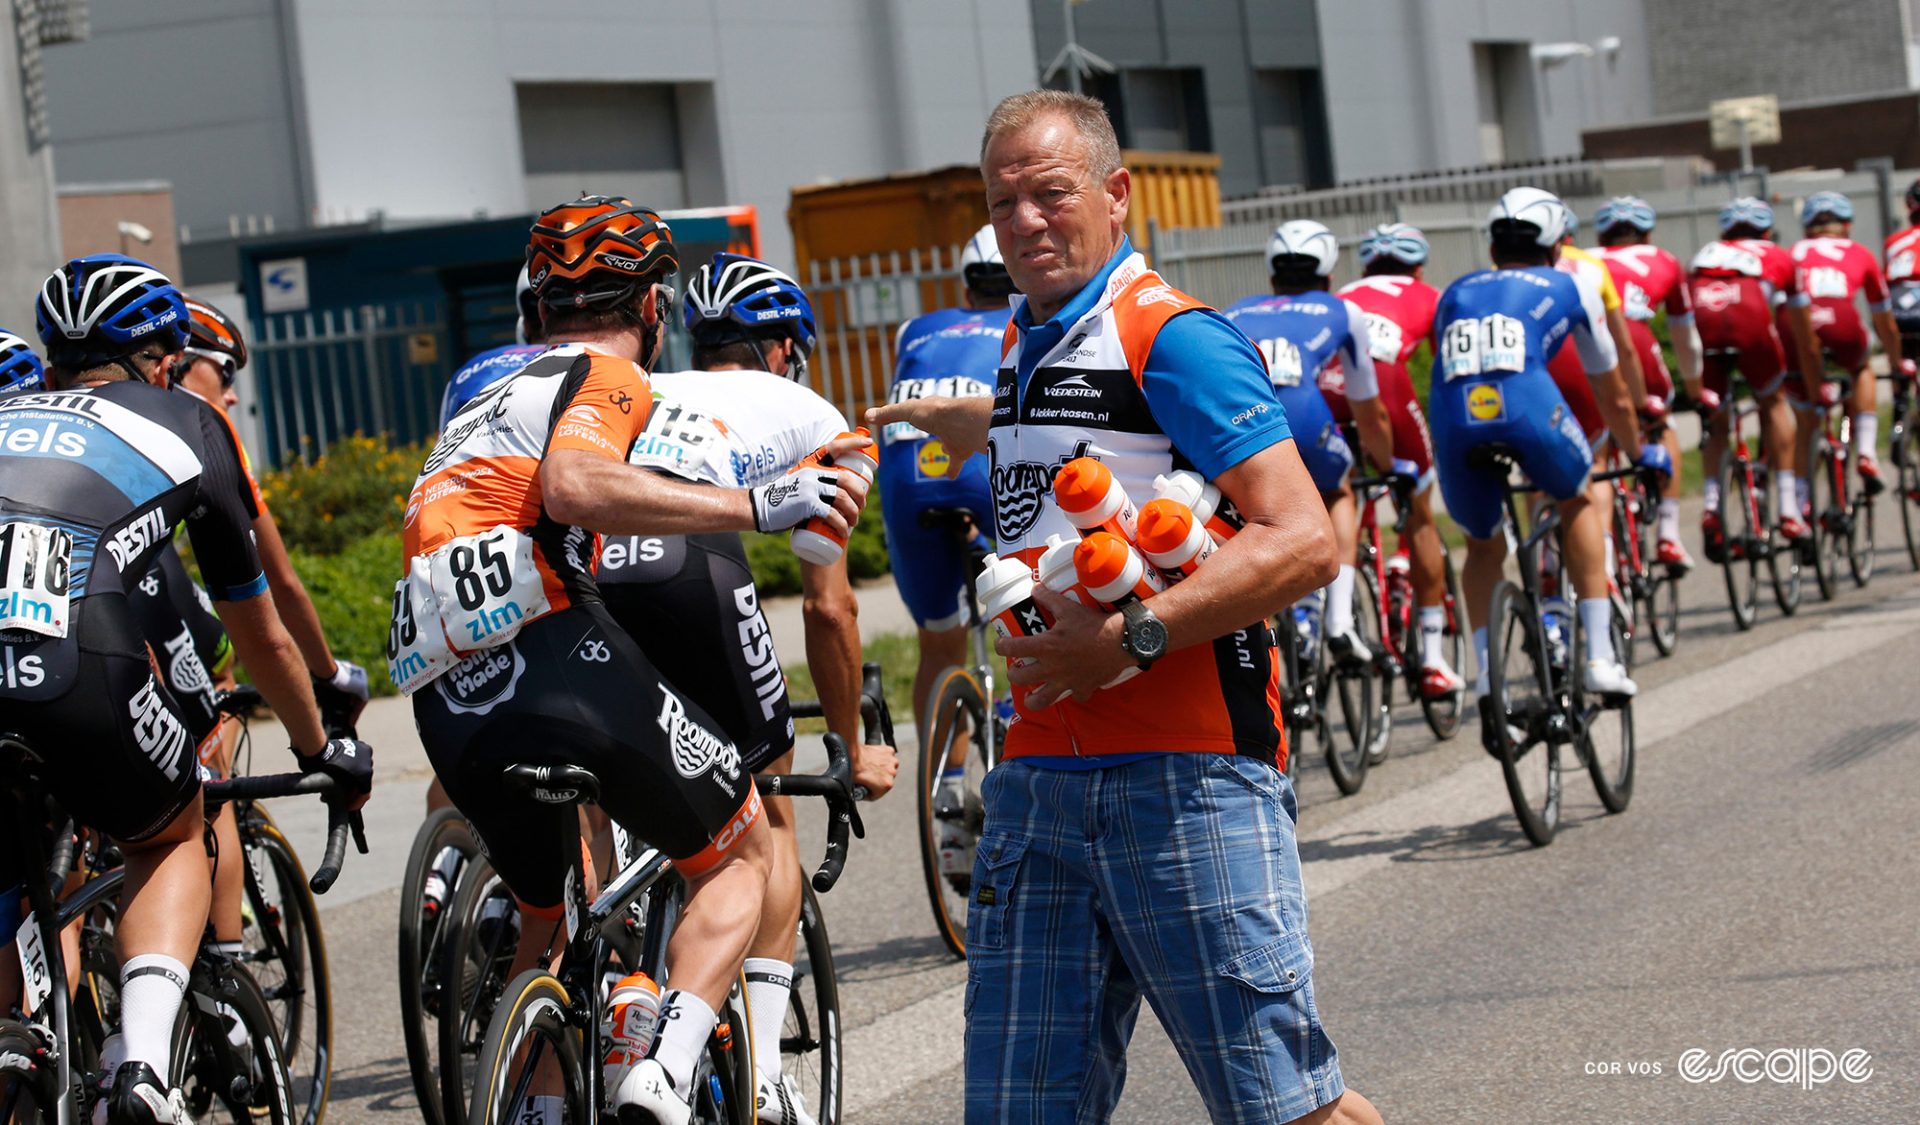 Soigneur Geert van Diepen hands bottles to riders at a race. The Belgian soigneur is holding six bottles in his left hand and crook of his arm as he hands one off in a no-look transfer that would make Aaron Rodgers weep.